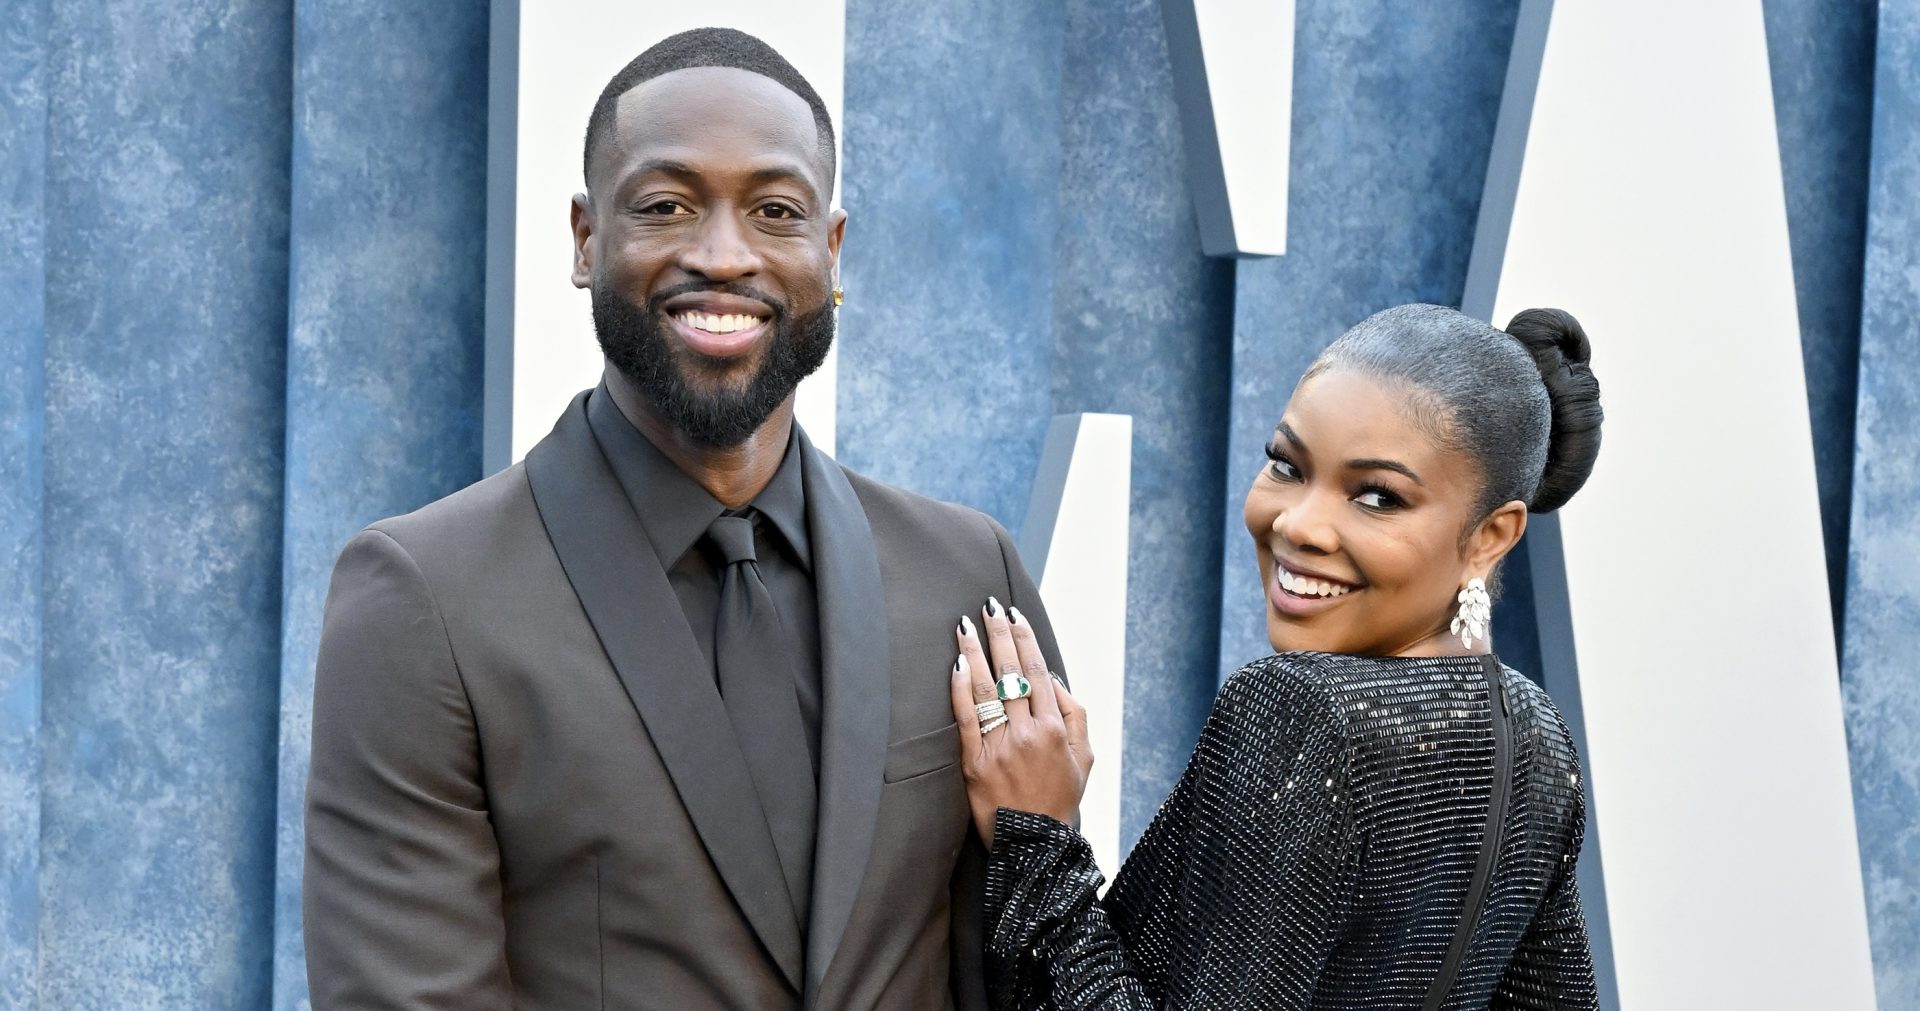 Gabrielle Union Shuts Down Speculation About Her Sex Life